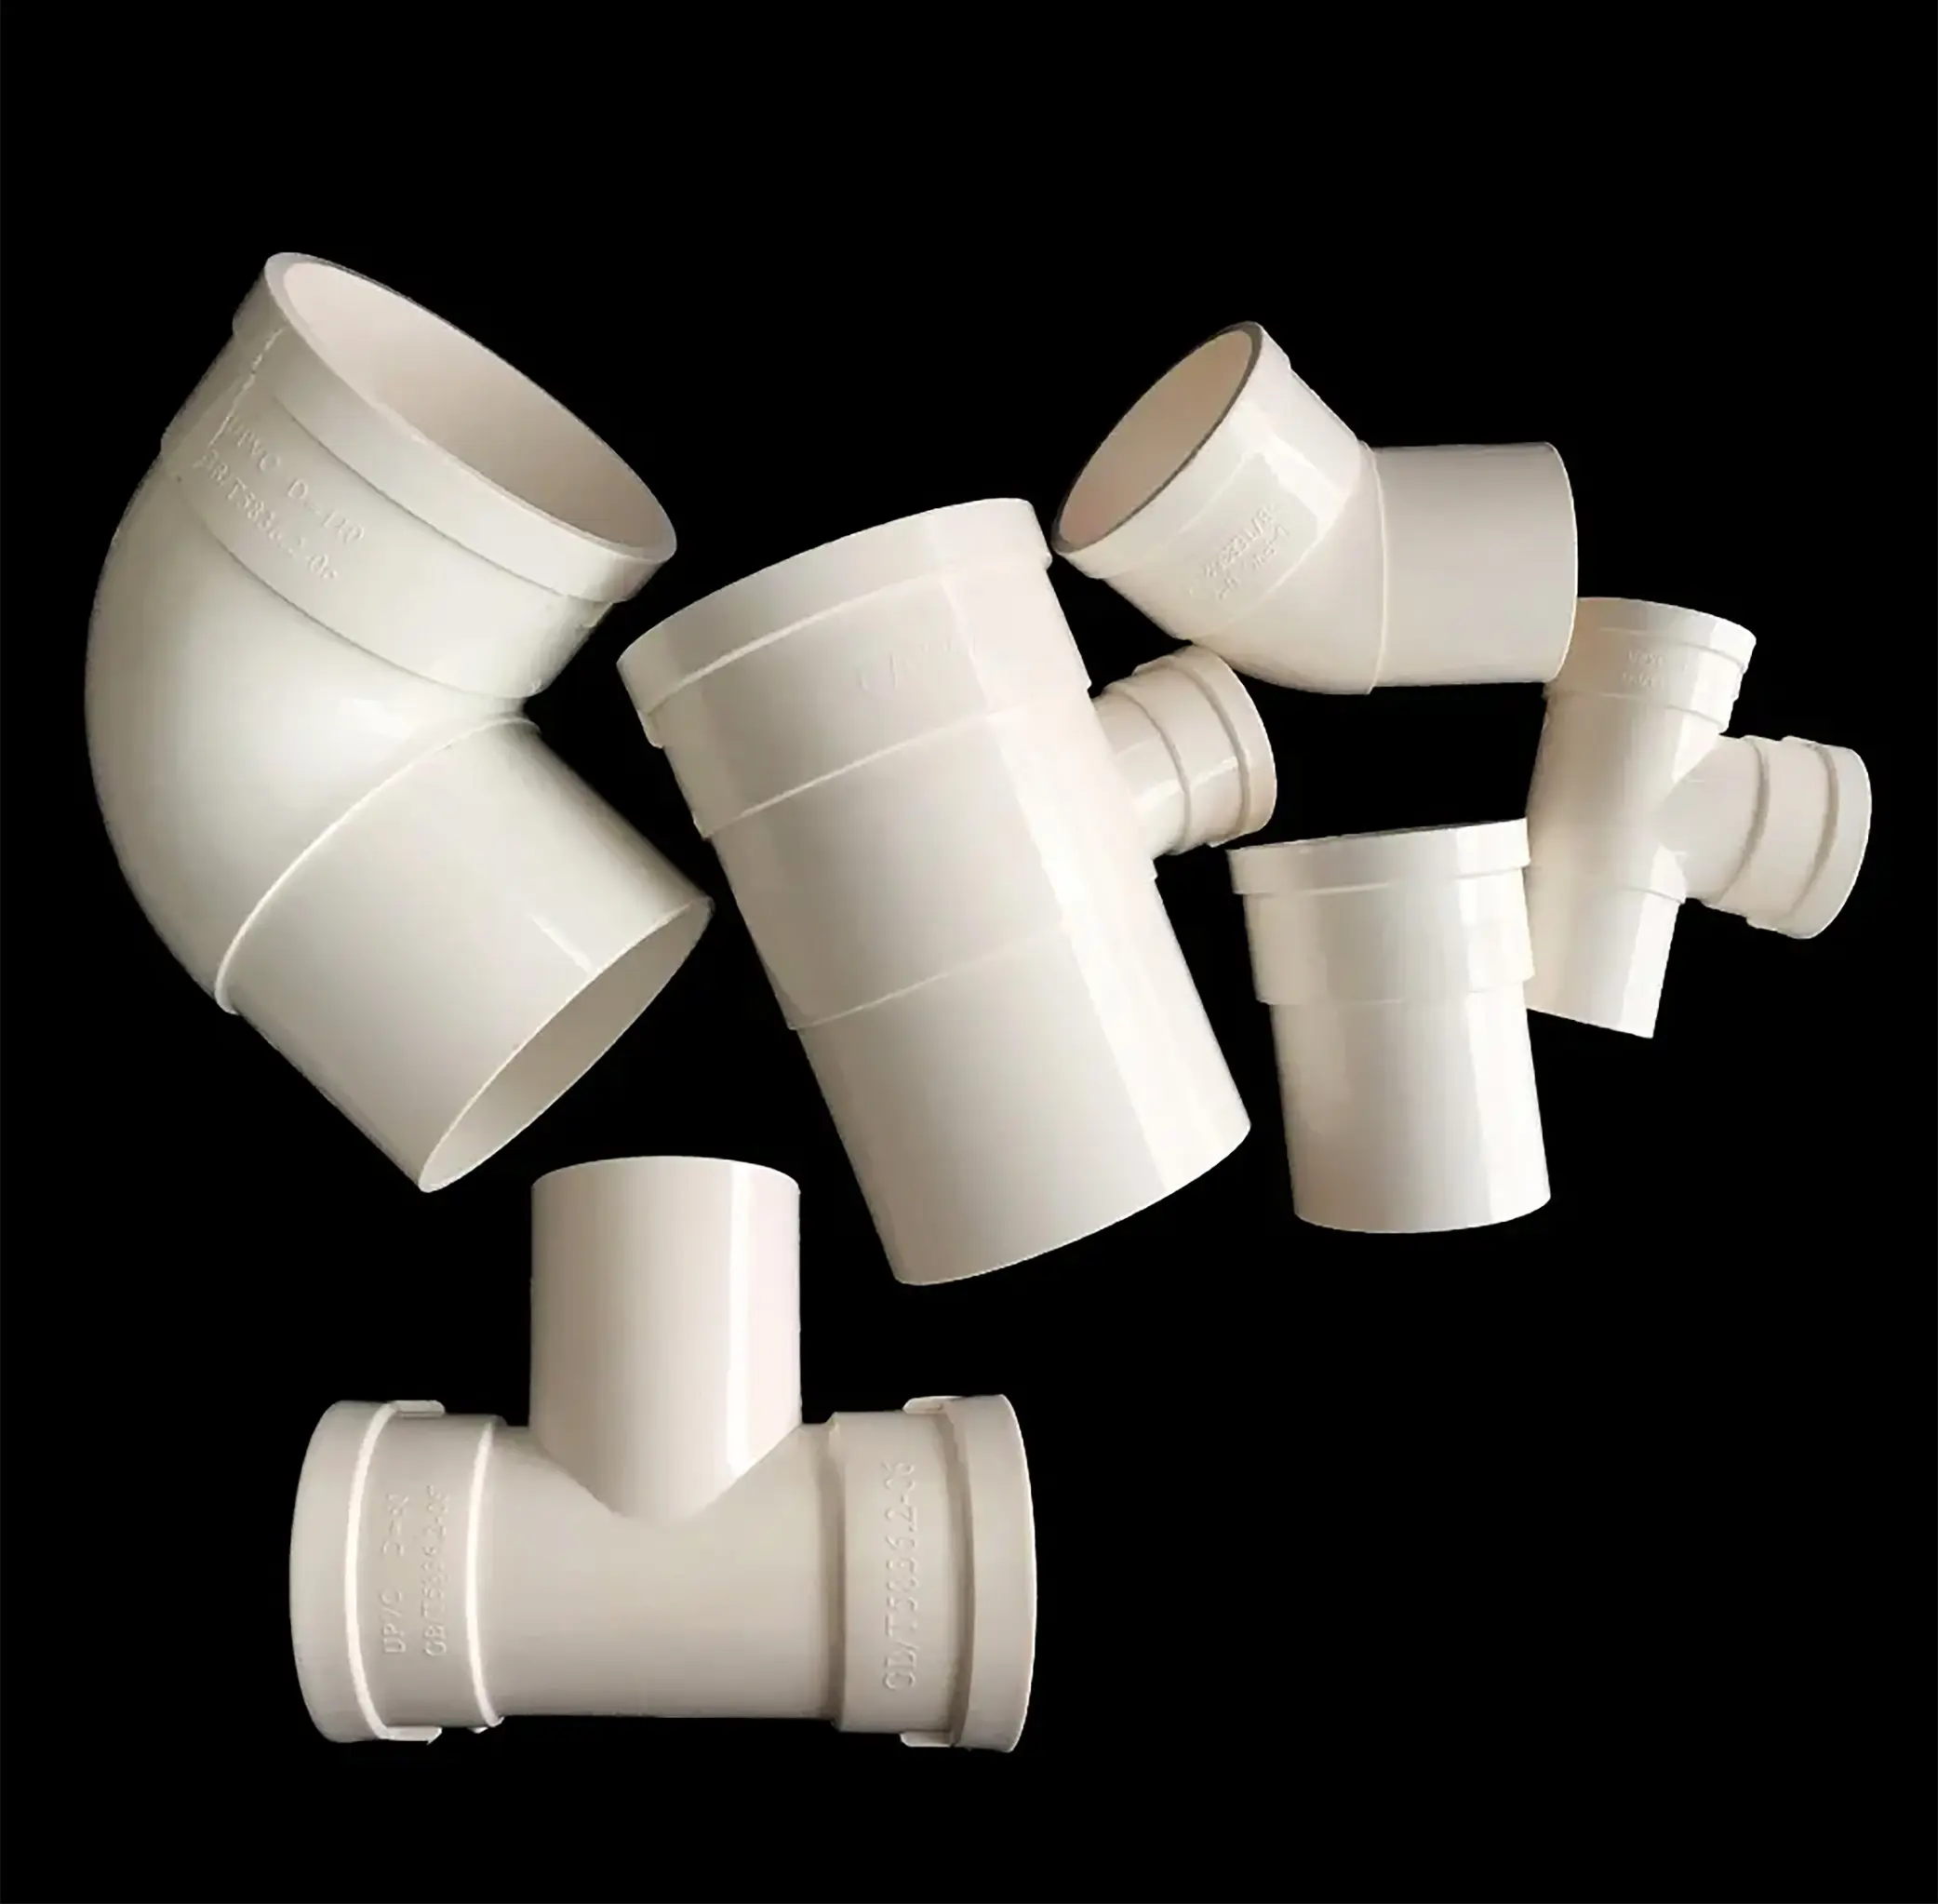 Multi Cavities high quality plastic PVC joint pipe fitting mold